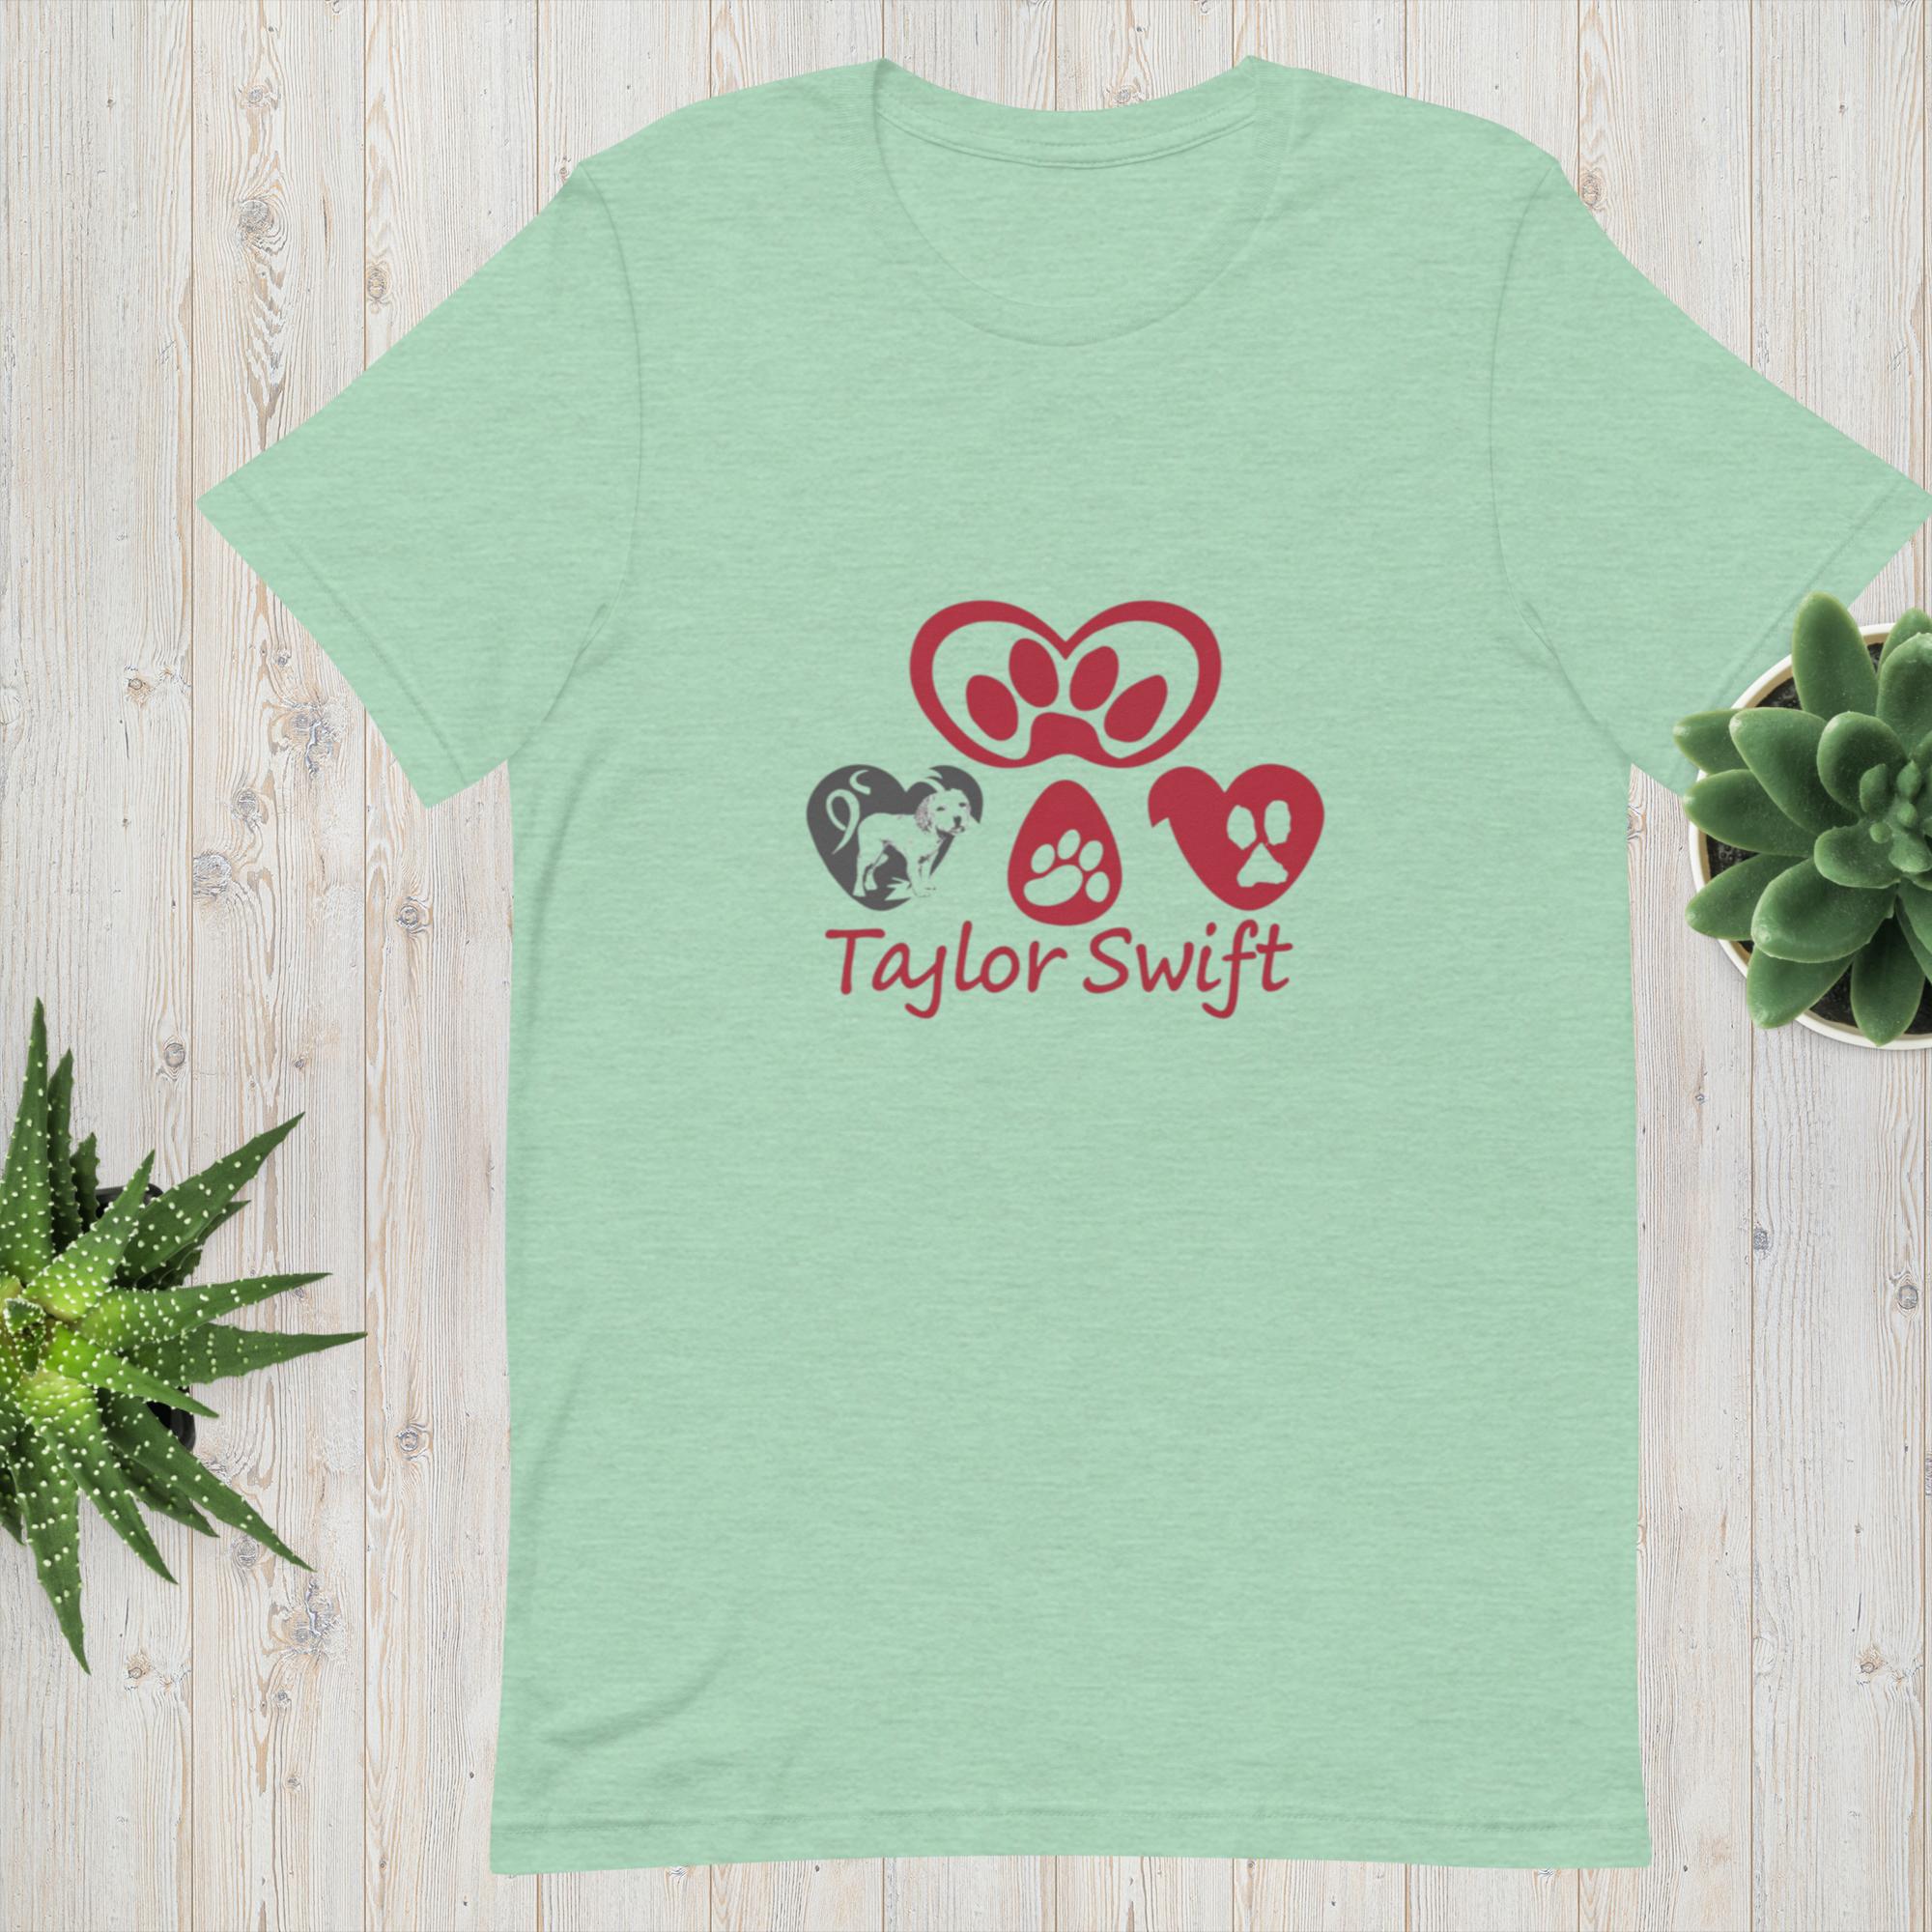 Unisex t-shirt. A Purr-fect Blend of Pet Love and Taylor Admiration!